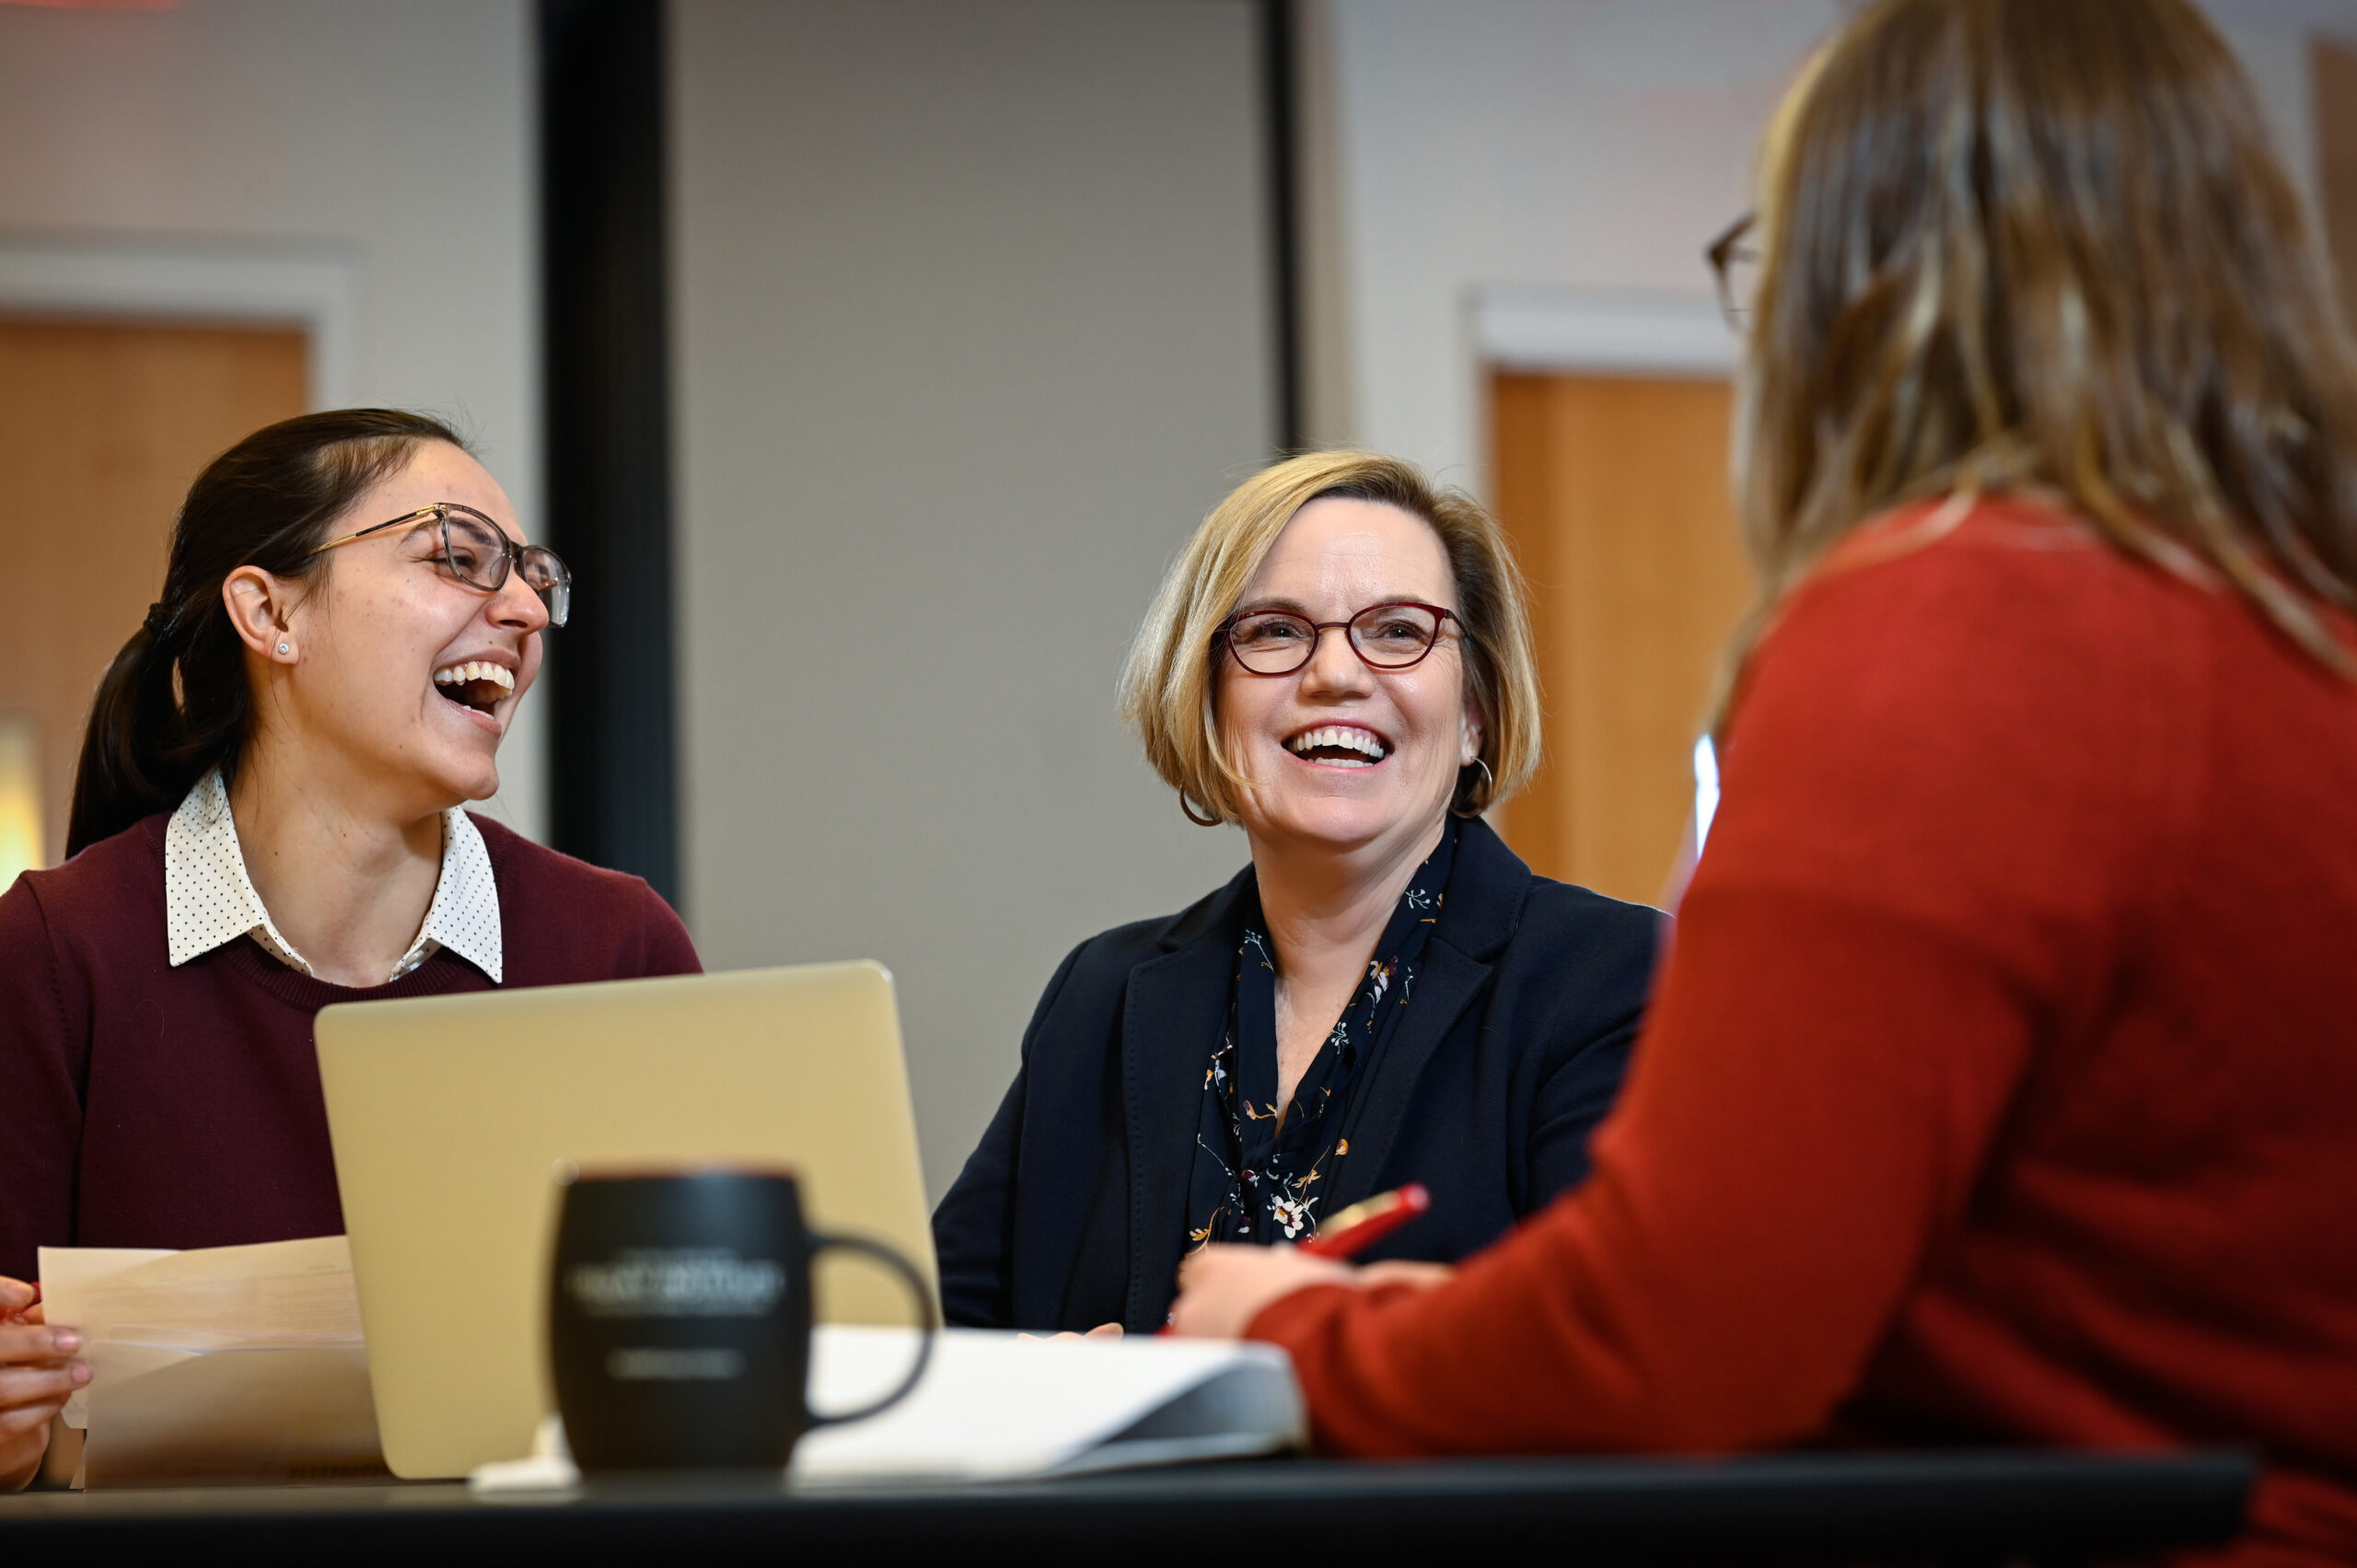 A group of women stand around a table talking and smiling. The photo focuses on a woman with short blonde hair and glasses, Gail Jones.